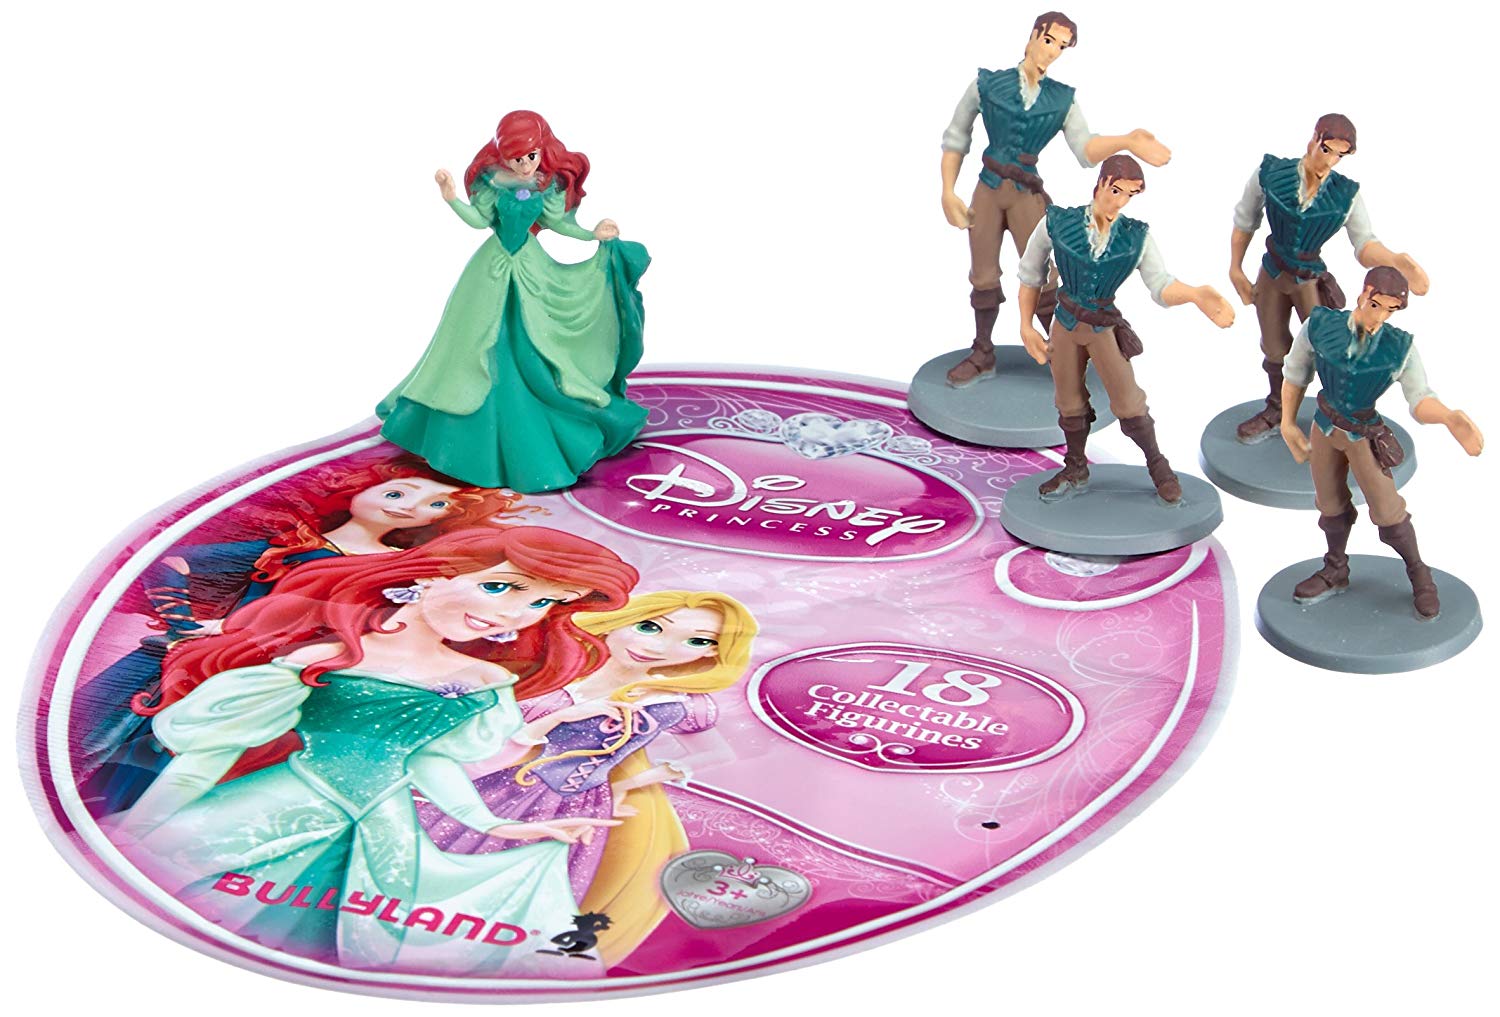 Bully 11970 A Walt Disney Princess Series 1, Collectible Figurines, Set of 